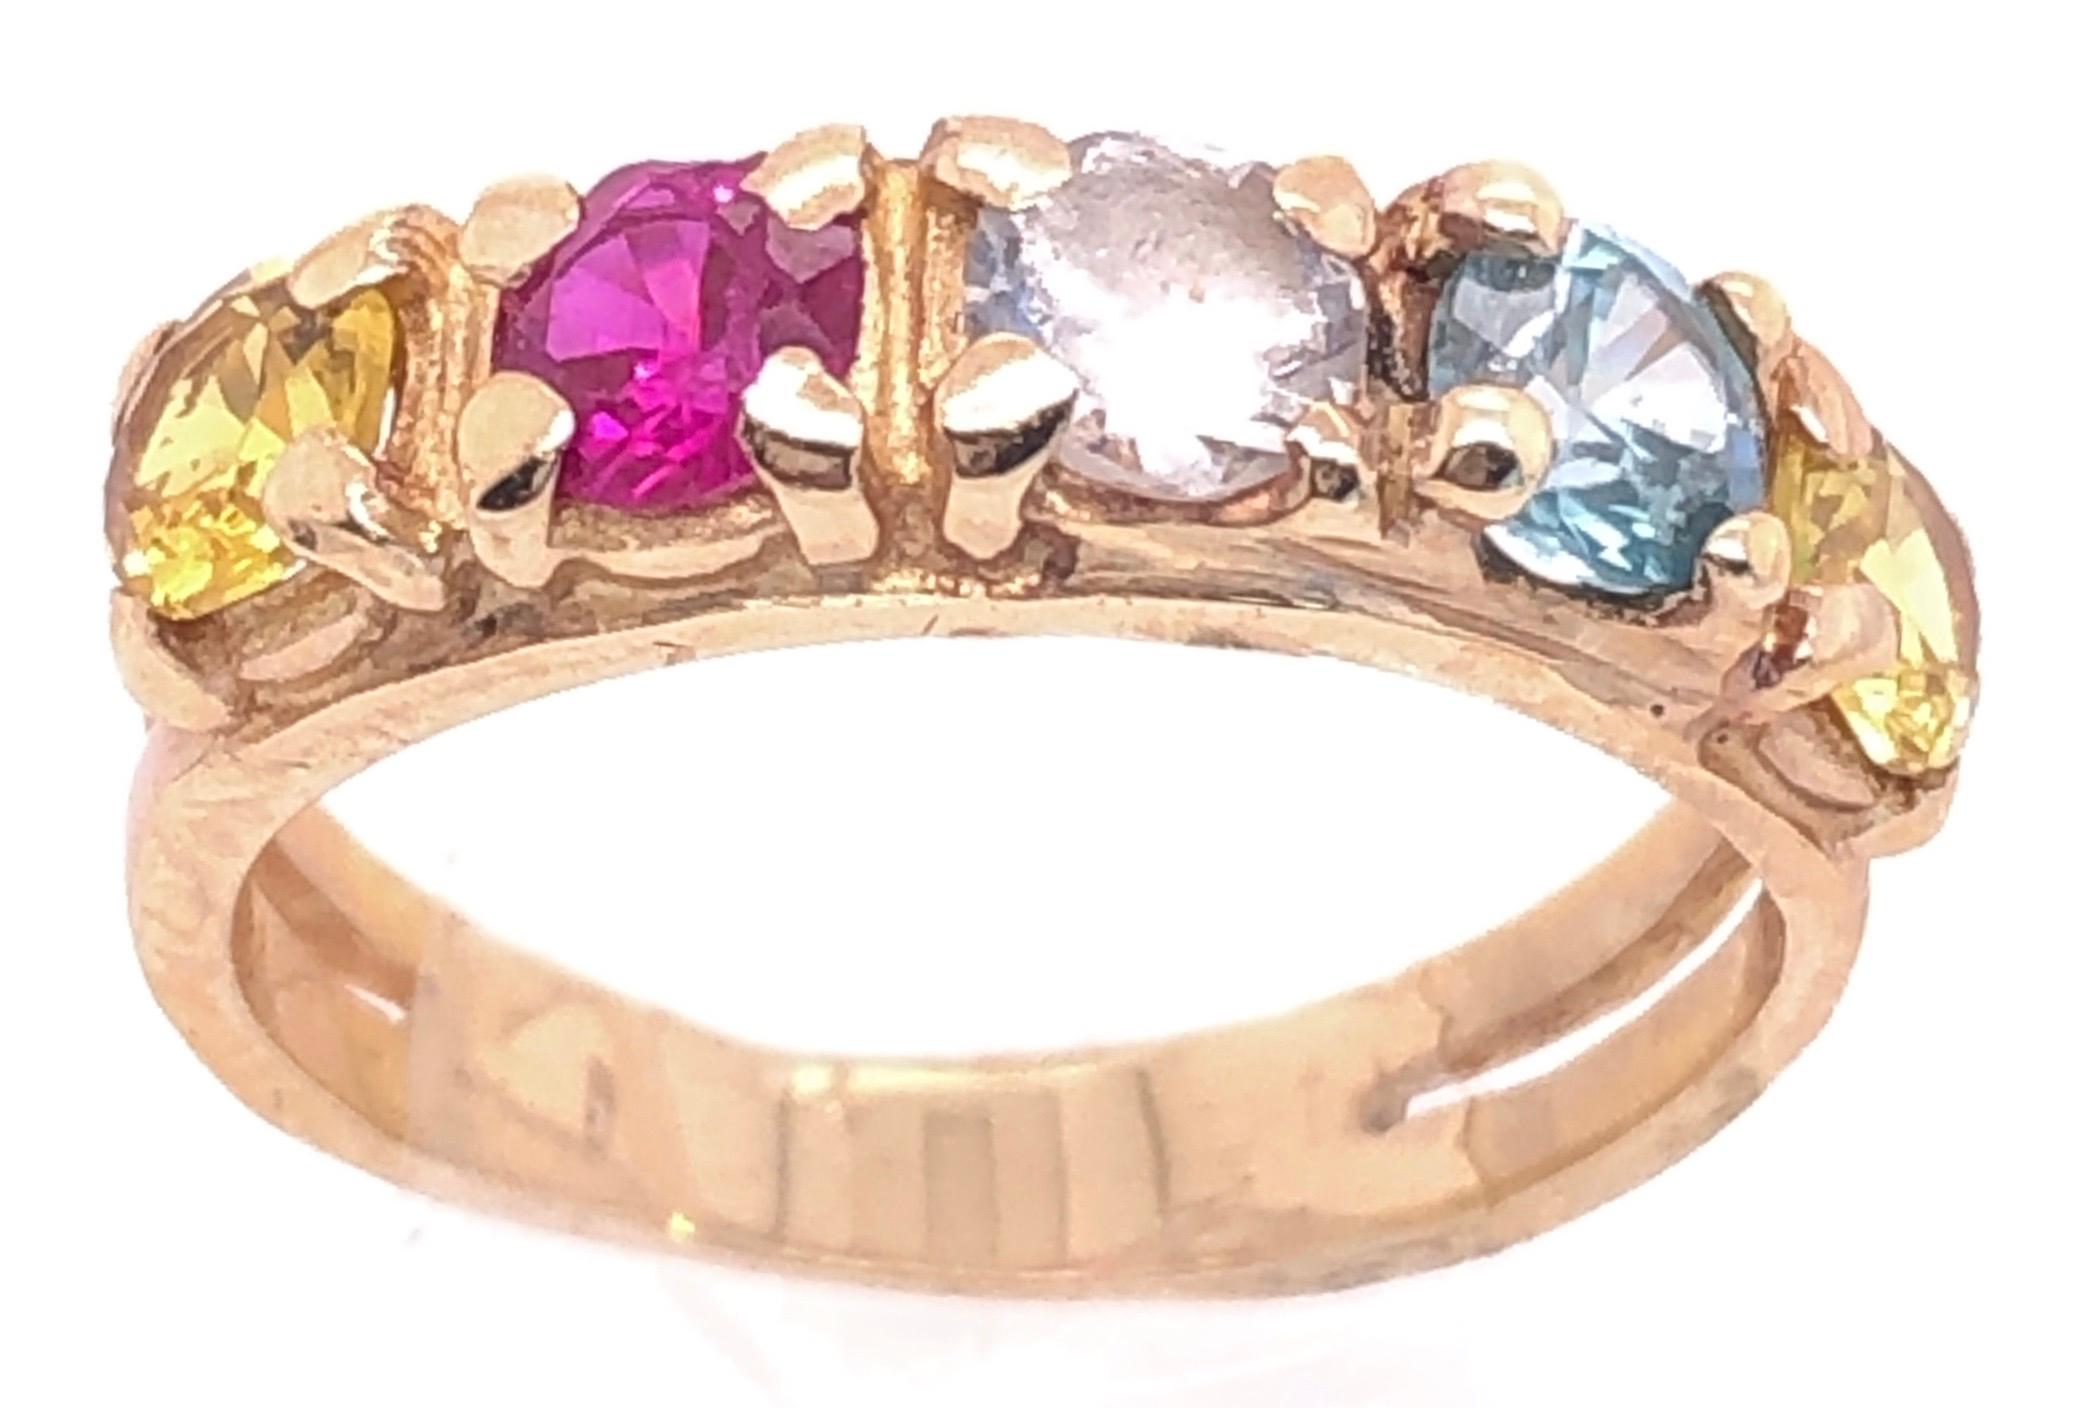 14 Karat Yellow Gold Band With Multi Colored Semi Precious Stones.
Blue Turquoise, Round Cubic zircon, Round Garnet, Round Citrine
Size 5.5
3 grams total weight.
